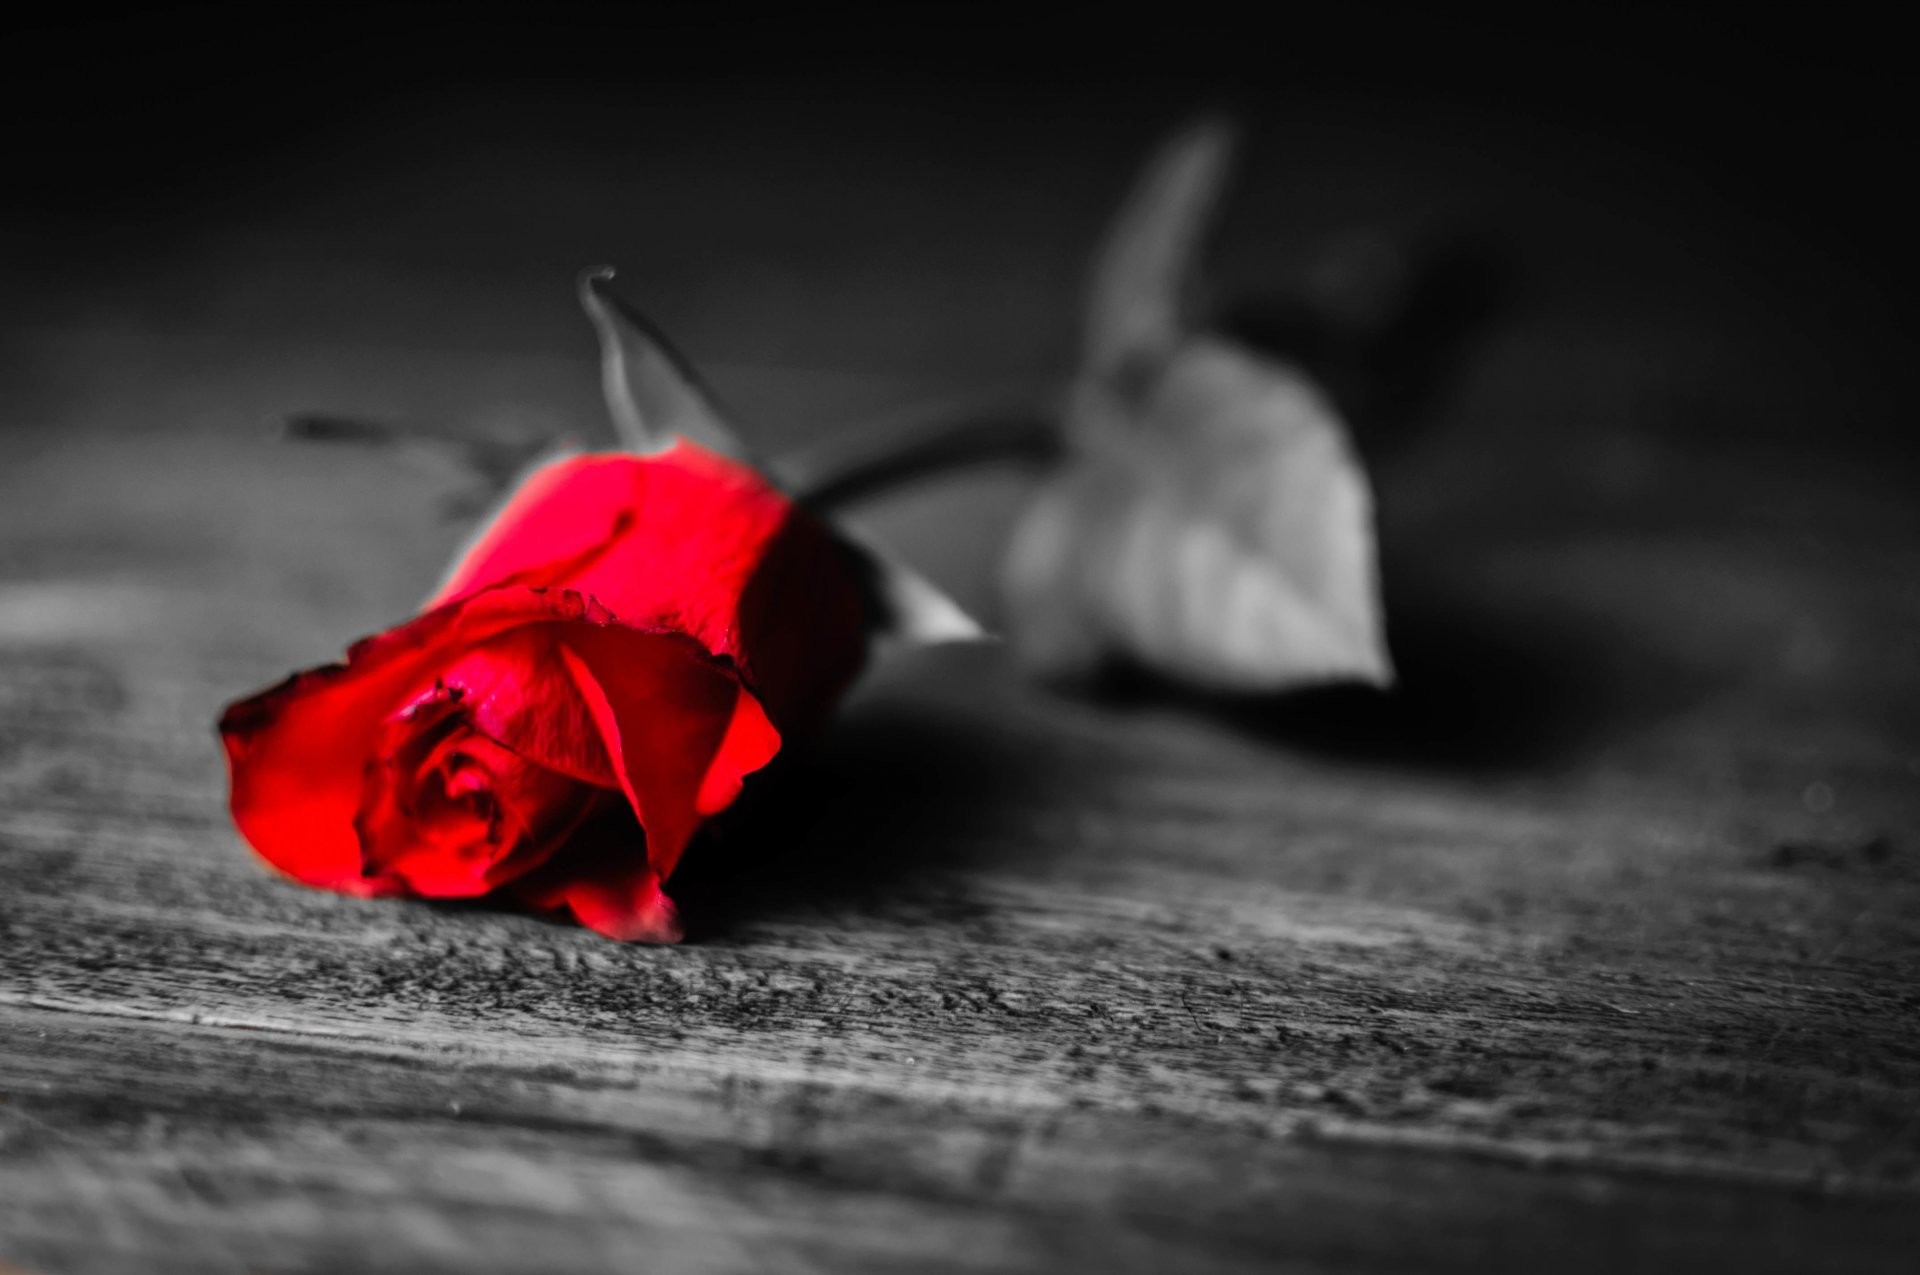 1920x1275 flower rose red petals black and white background loneliness longing leaves  leaf wallpaper widescreen full screen